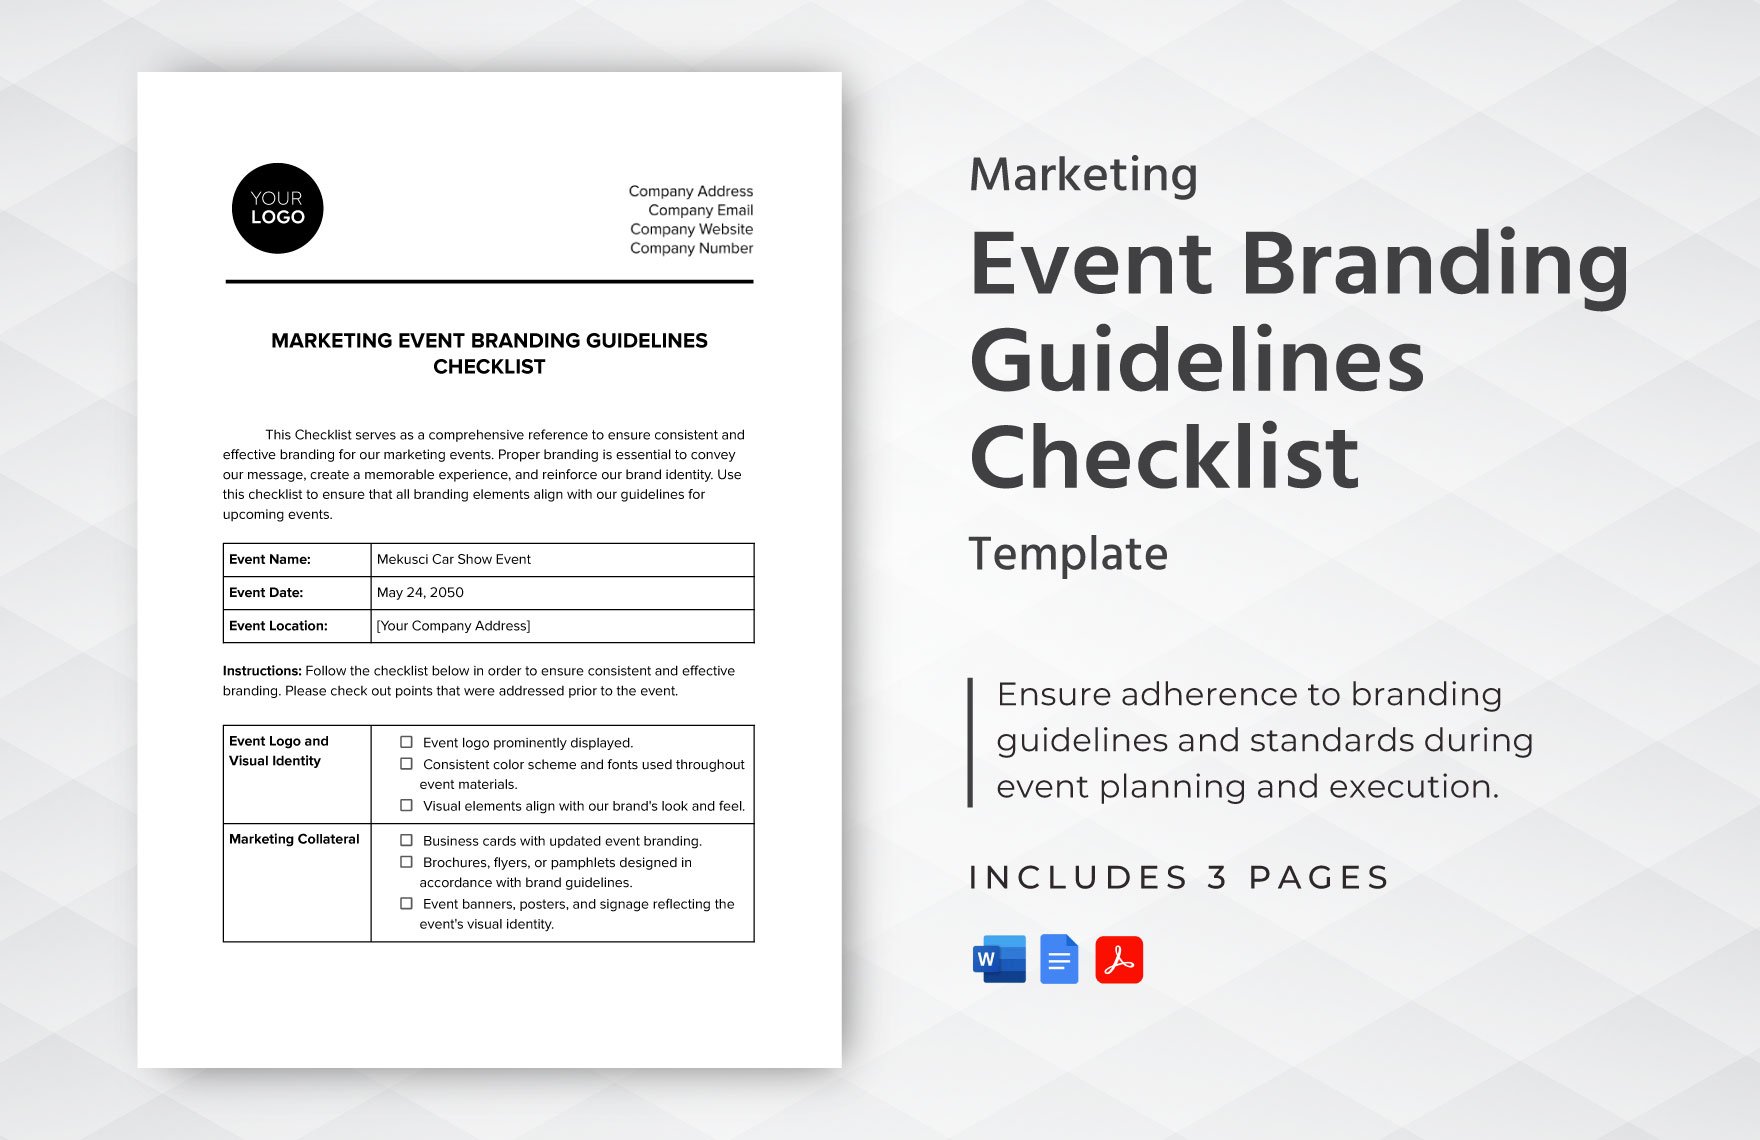 Marketing Event Branding Guidelines Checklist Template in Word, Google Docs, PDF